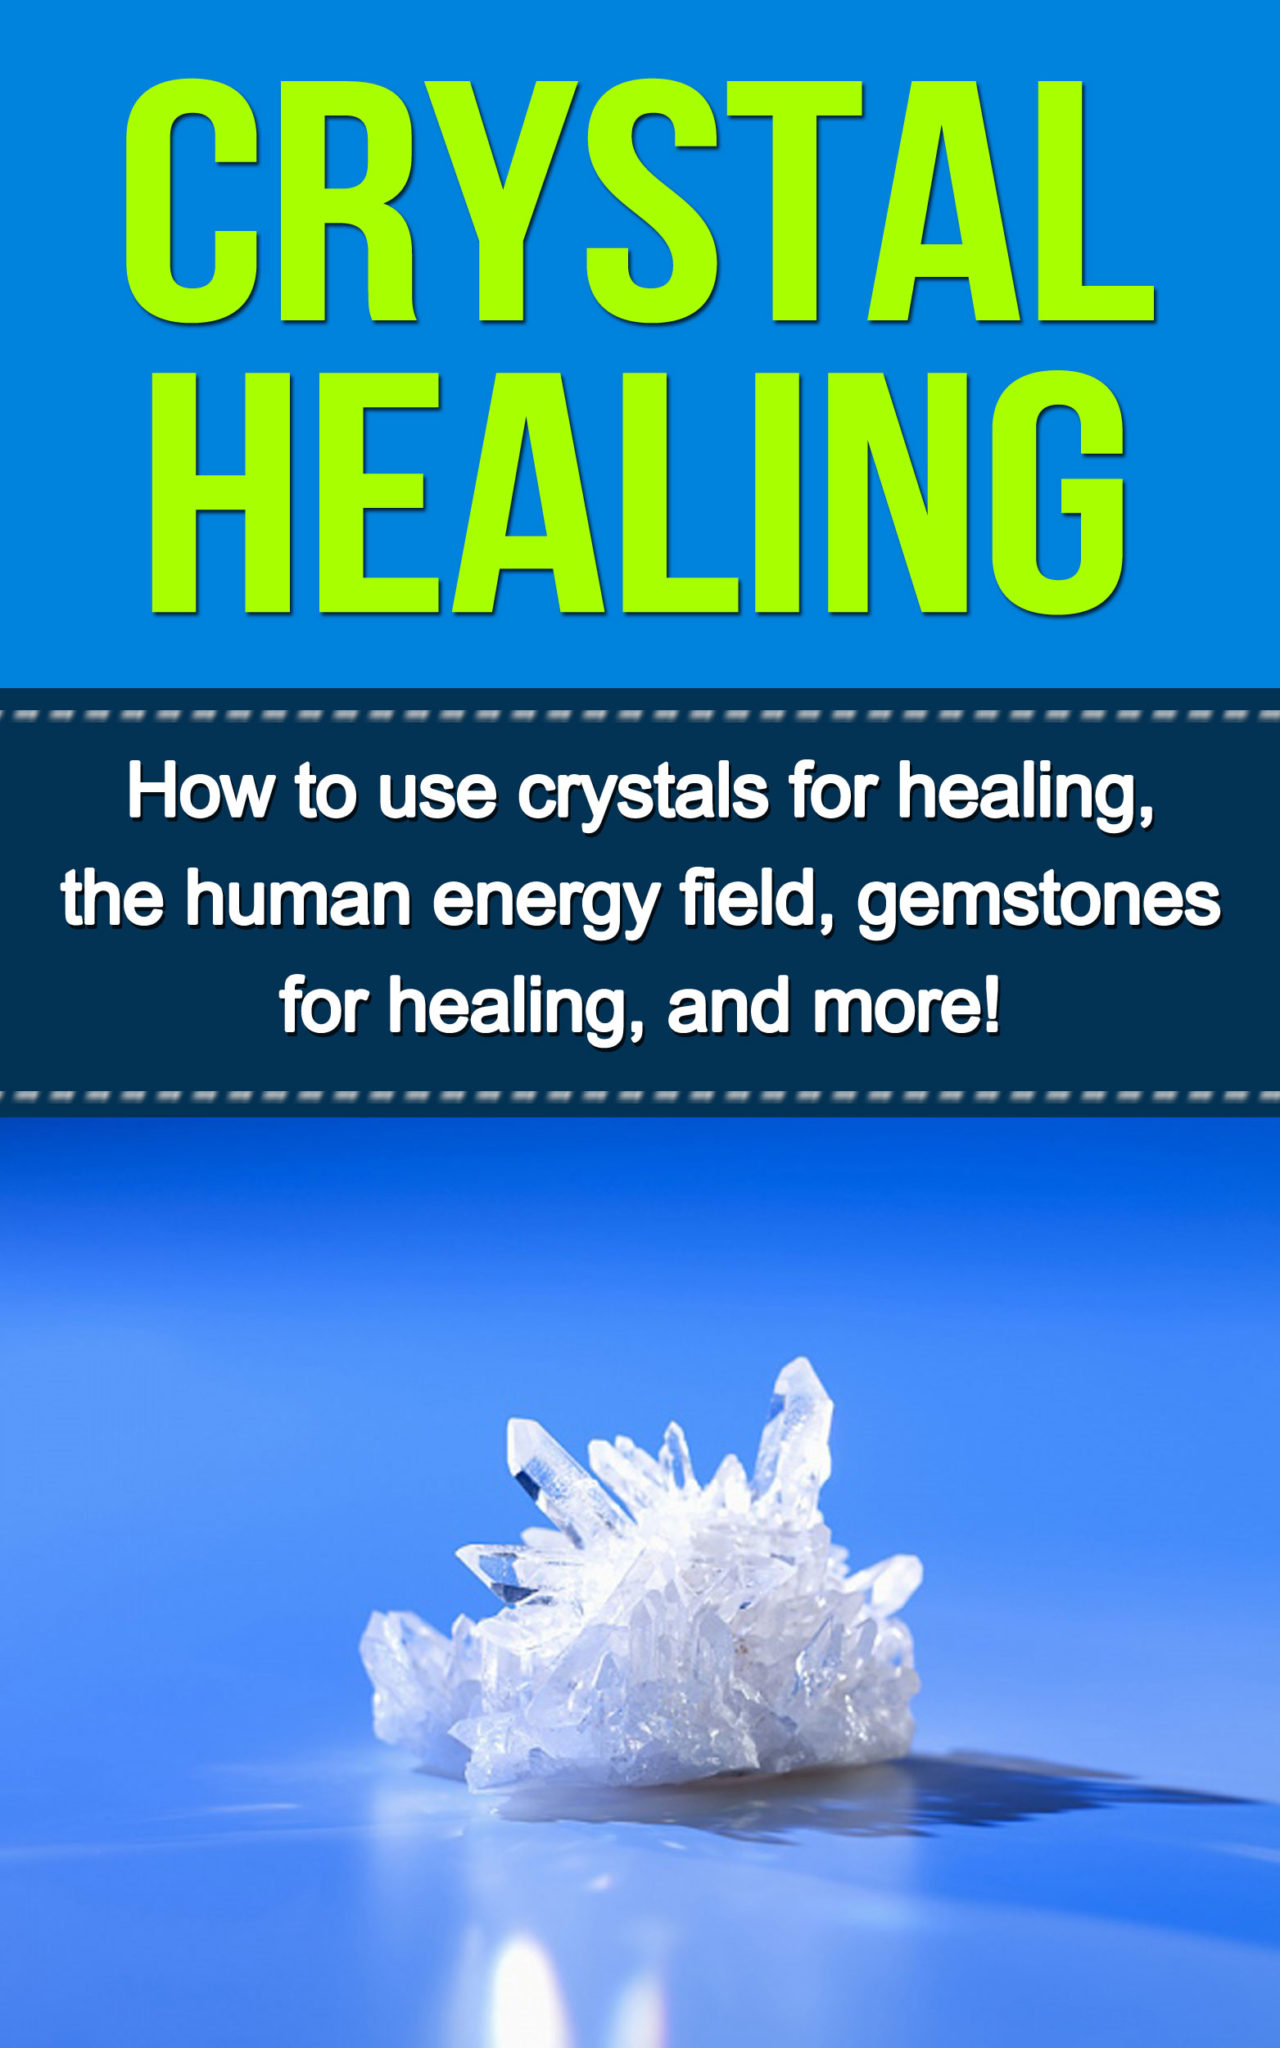 FREE: Crystal Healing: How to use crystals for healing, the human energy field, gemstones for healing, and more! by Samantha Lowe